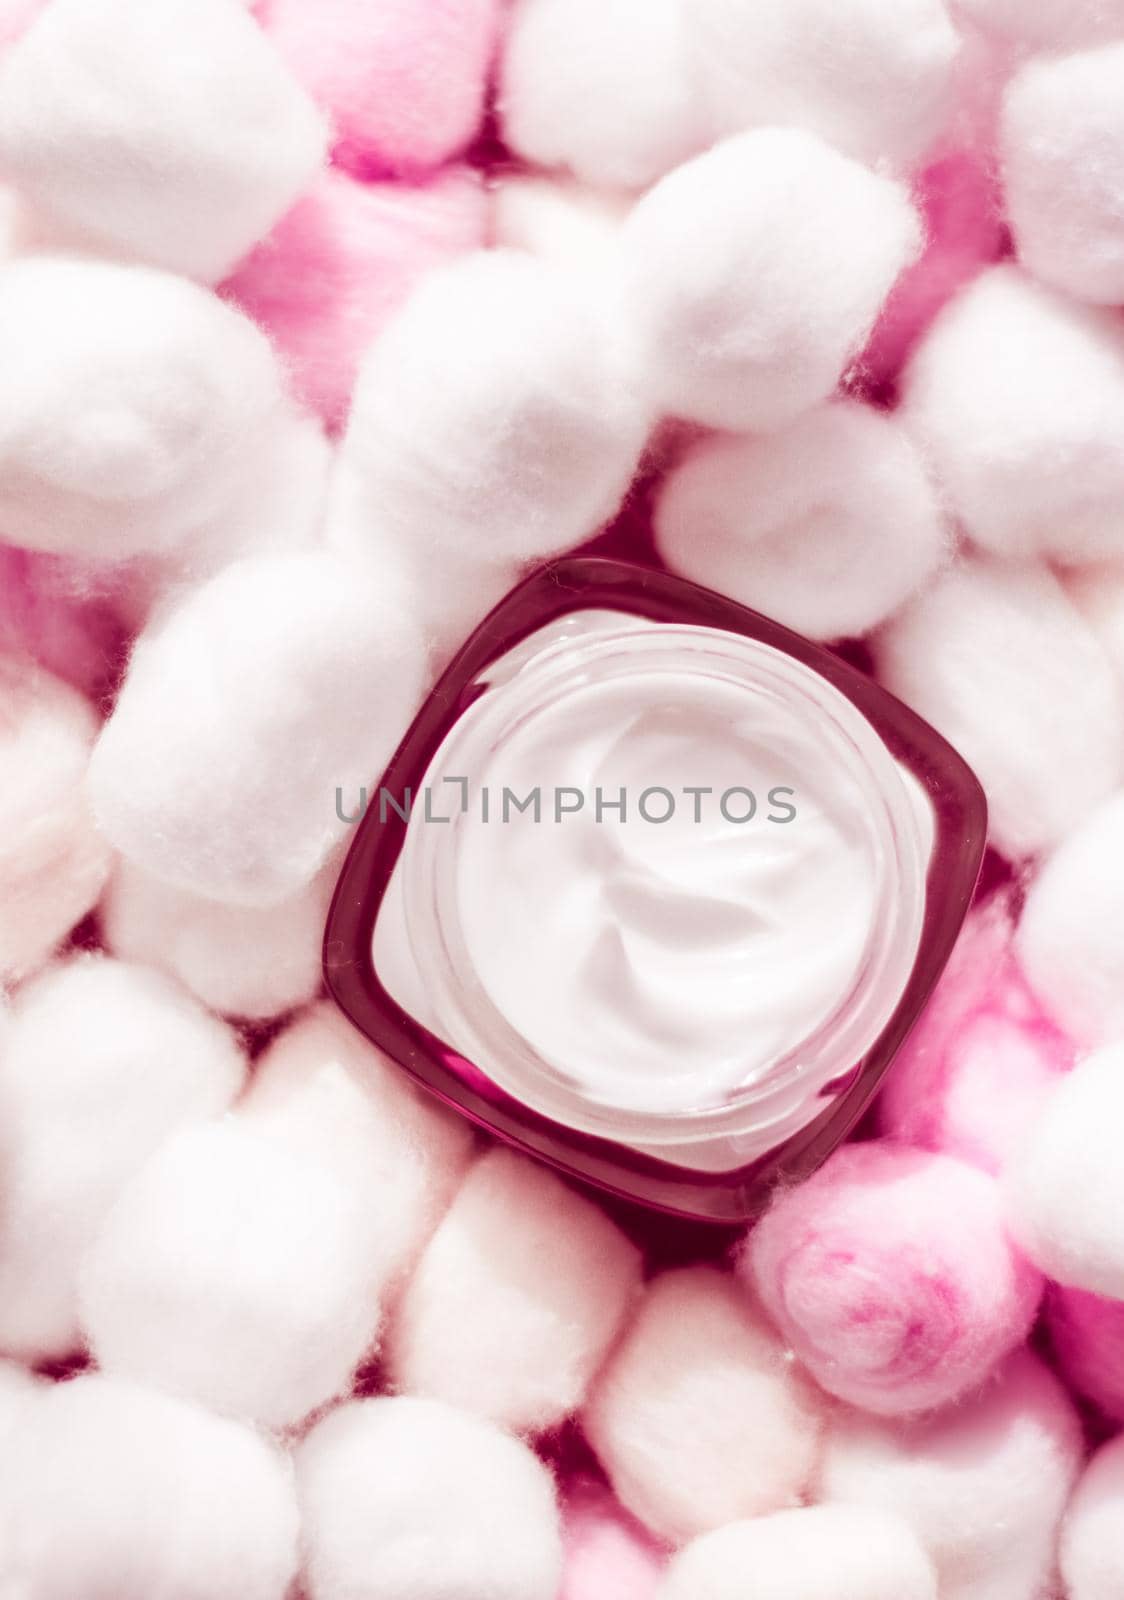 Luxury face cream for sensitive skin and pink cotton balls on background, spa cosmetics and natural skincare beauty brand product by Anneleven